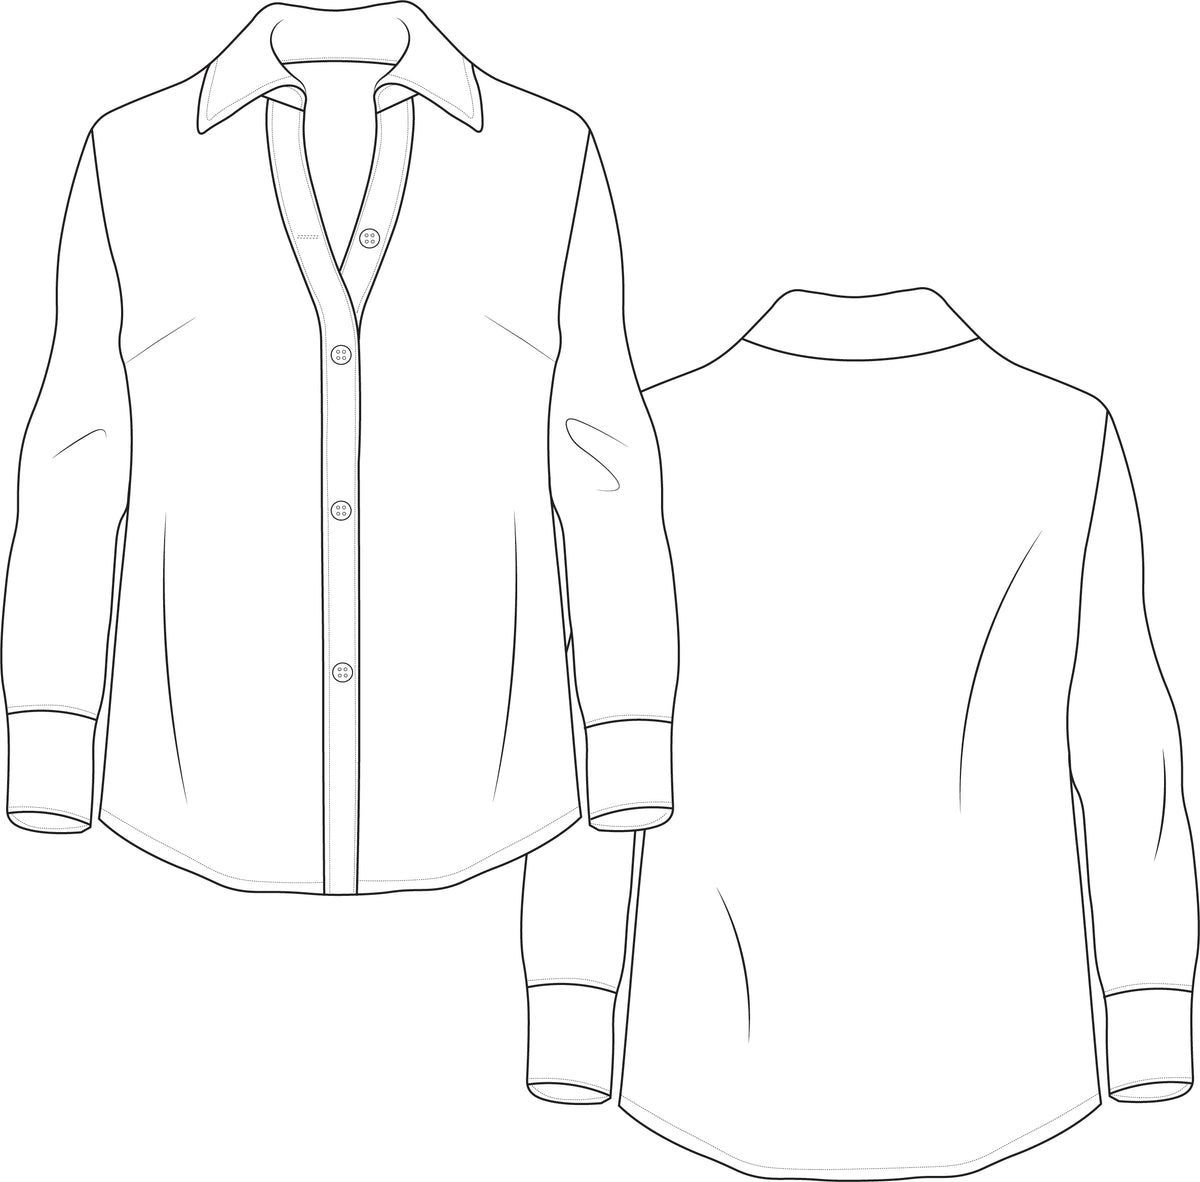 Fashion Technical Drawing - Flat Sketch Blouse